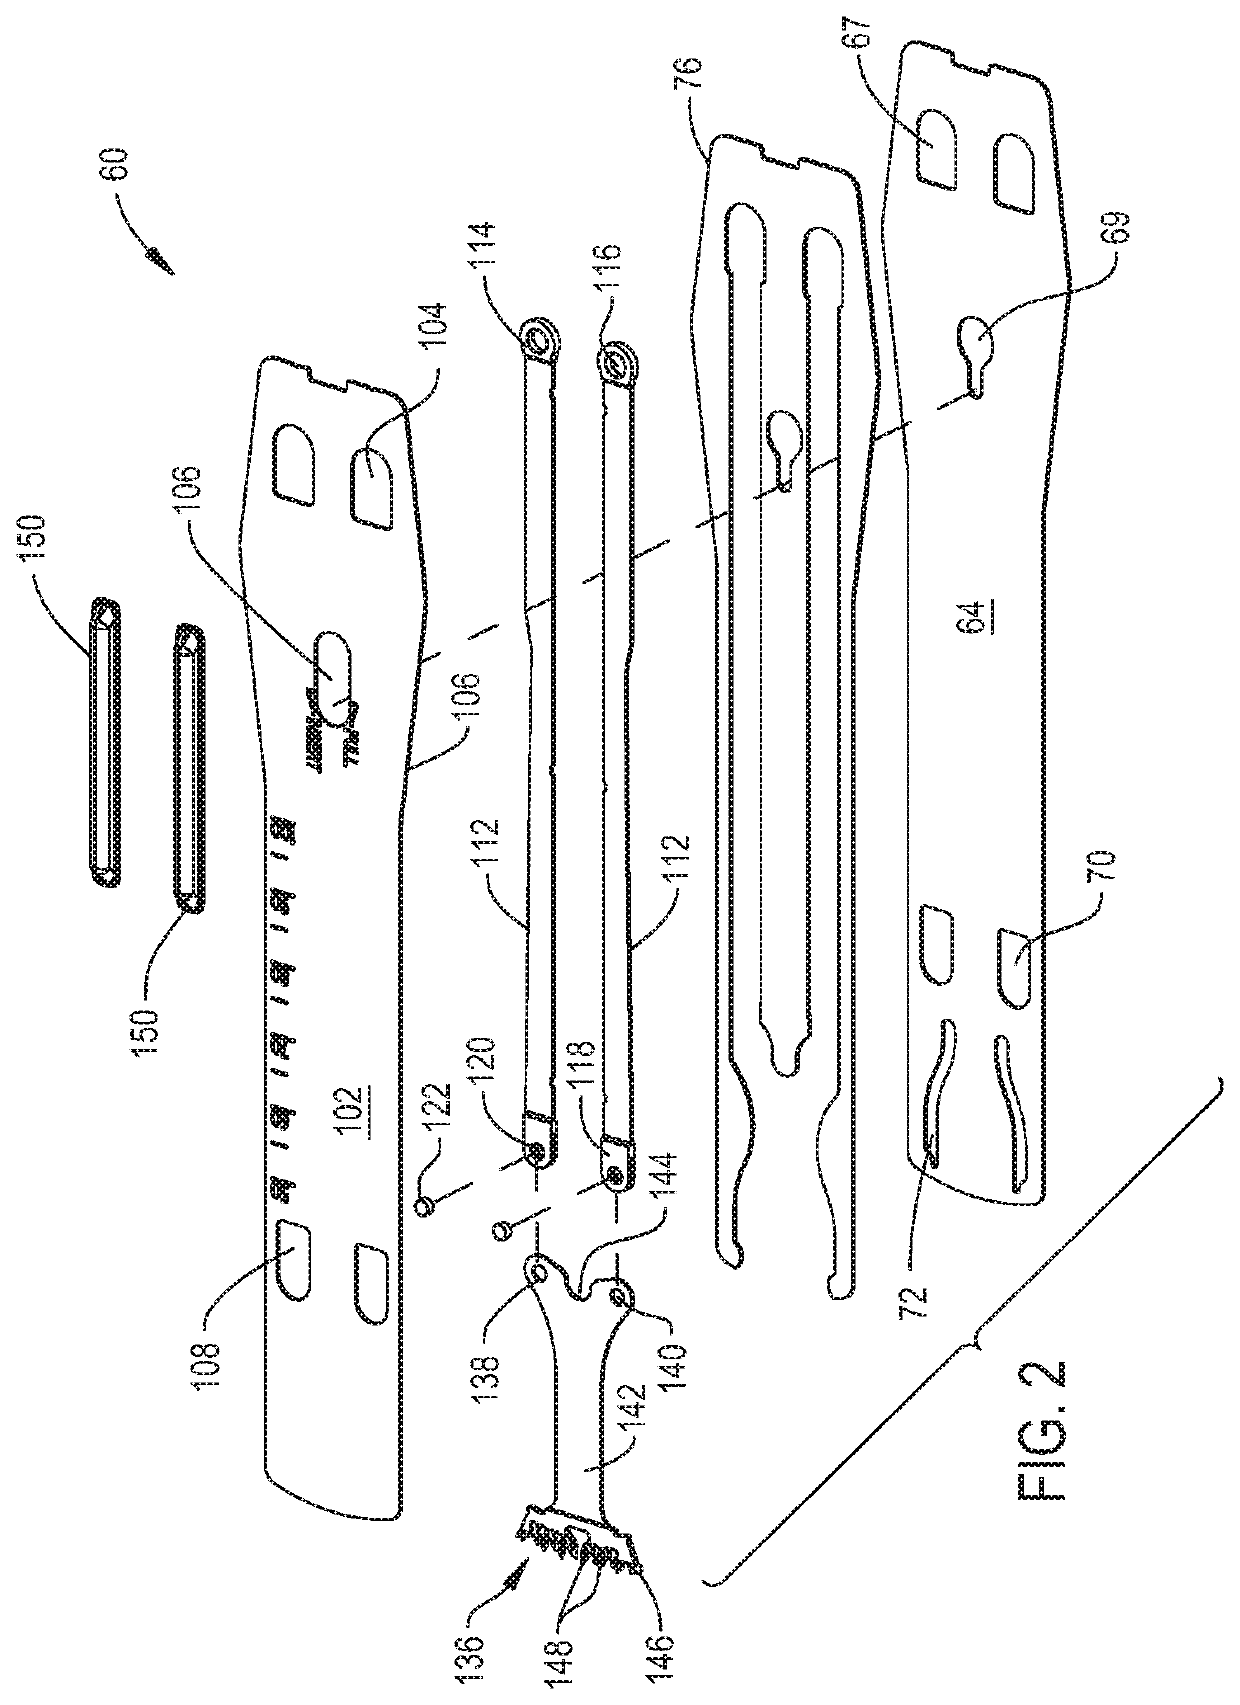 Surgical Sagittal Blade Cartridge With A Reinforced Guide Bar